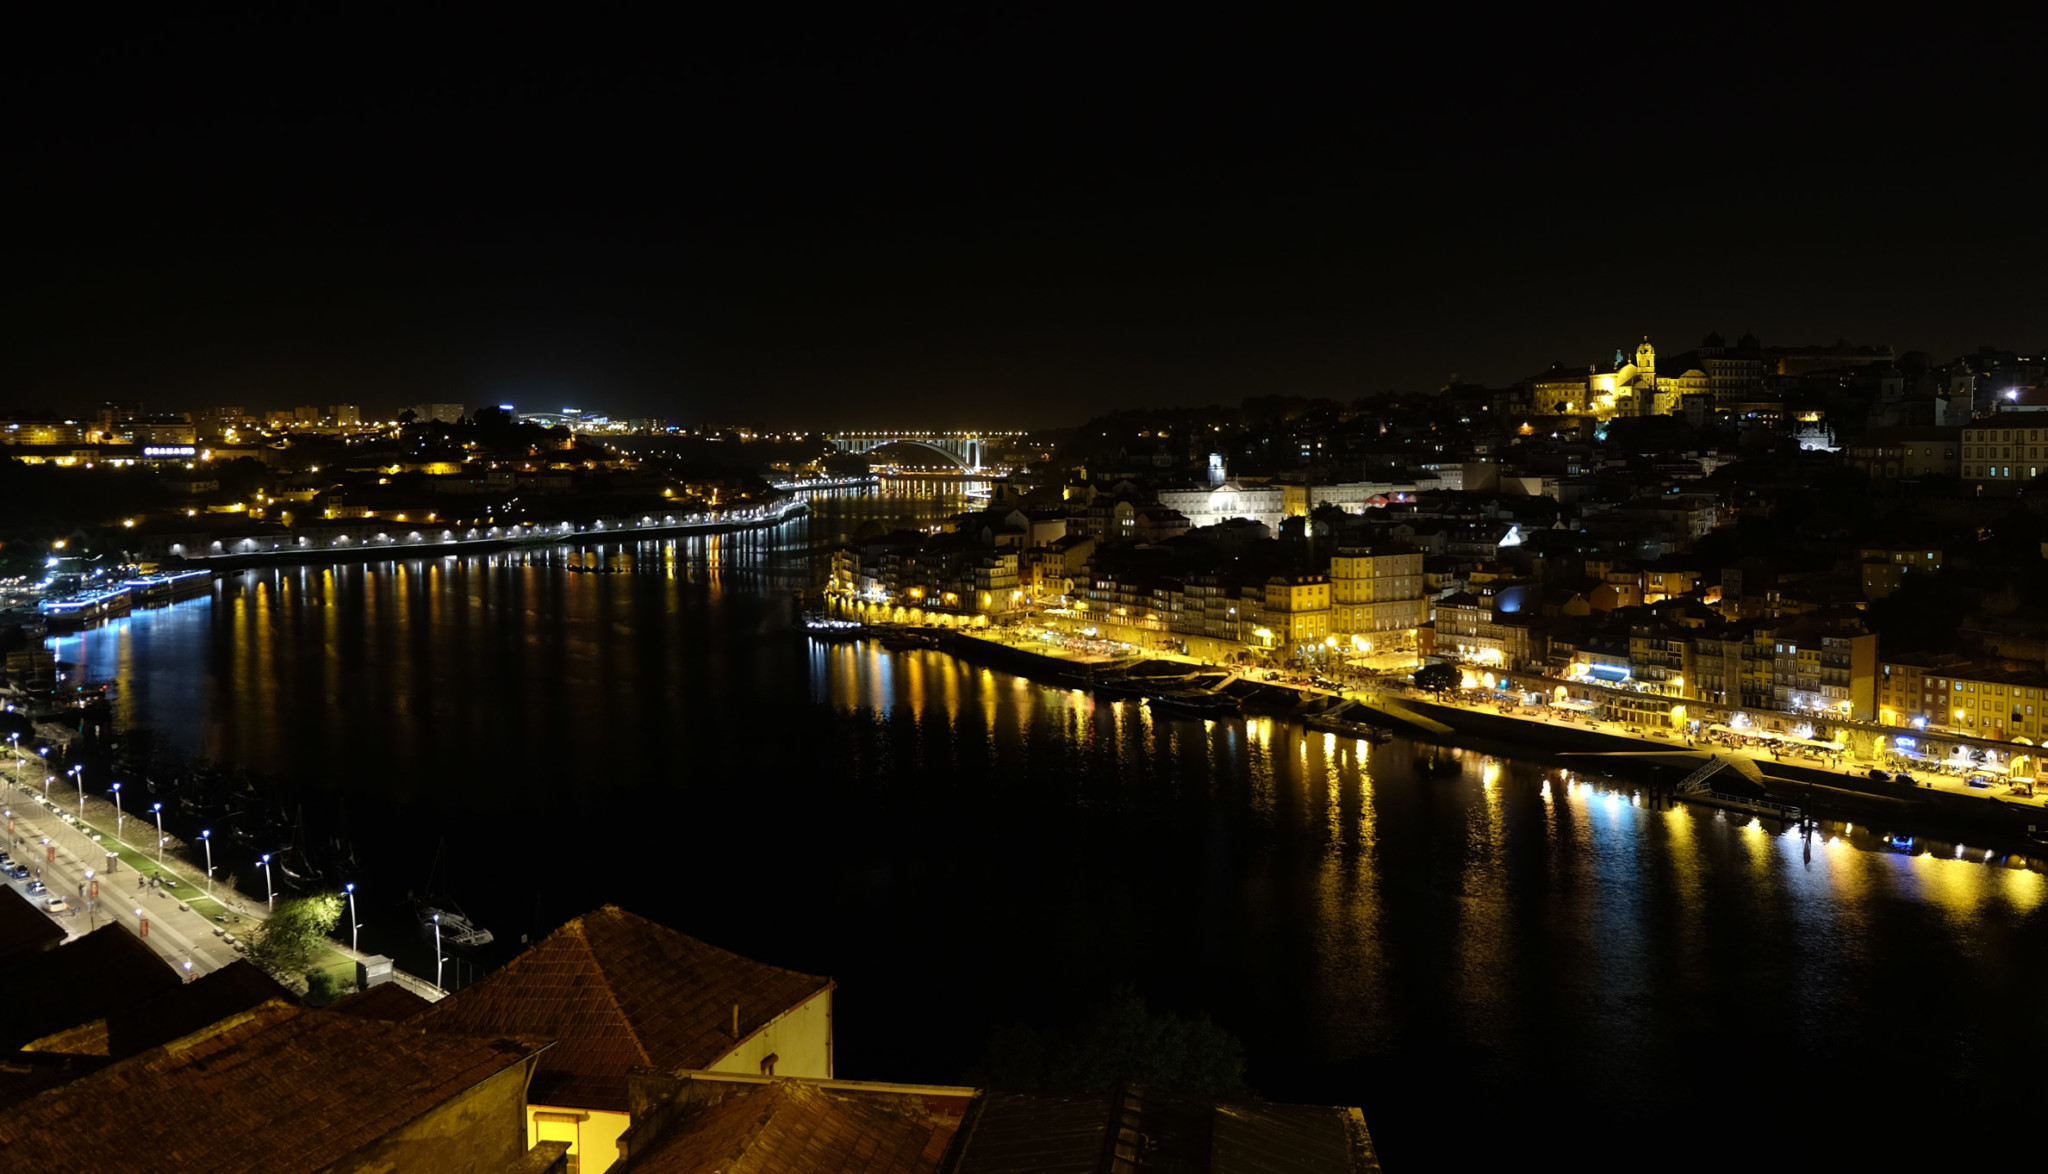 The view from the Dom Luís I Bridge at night